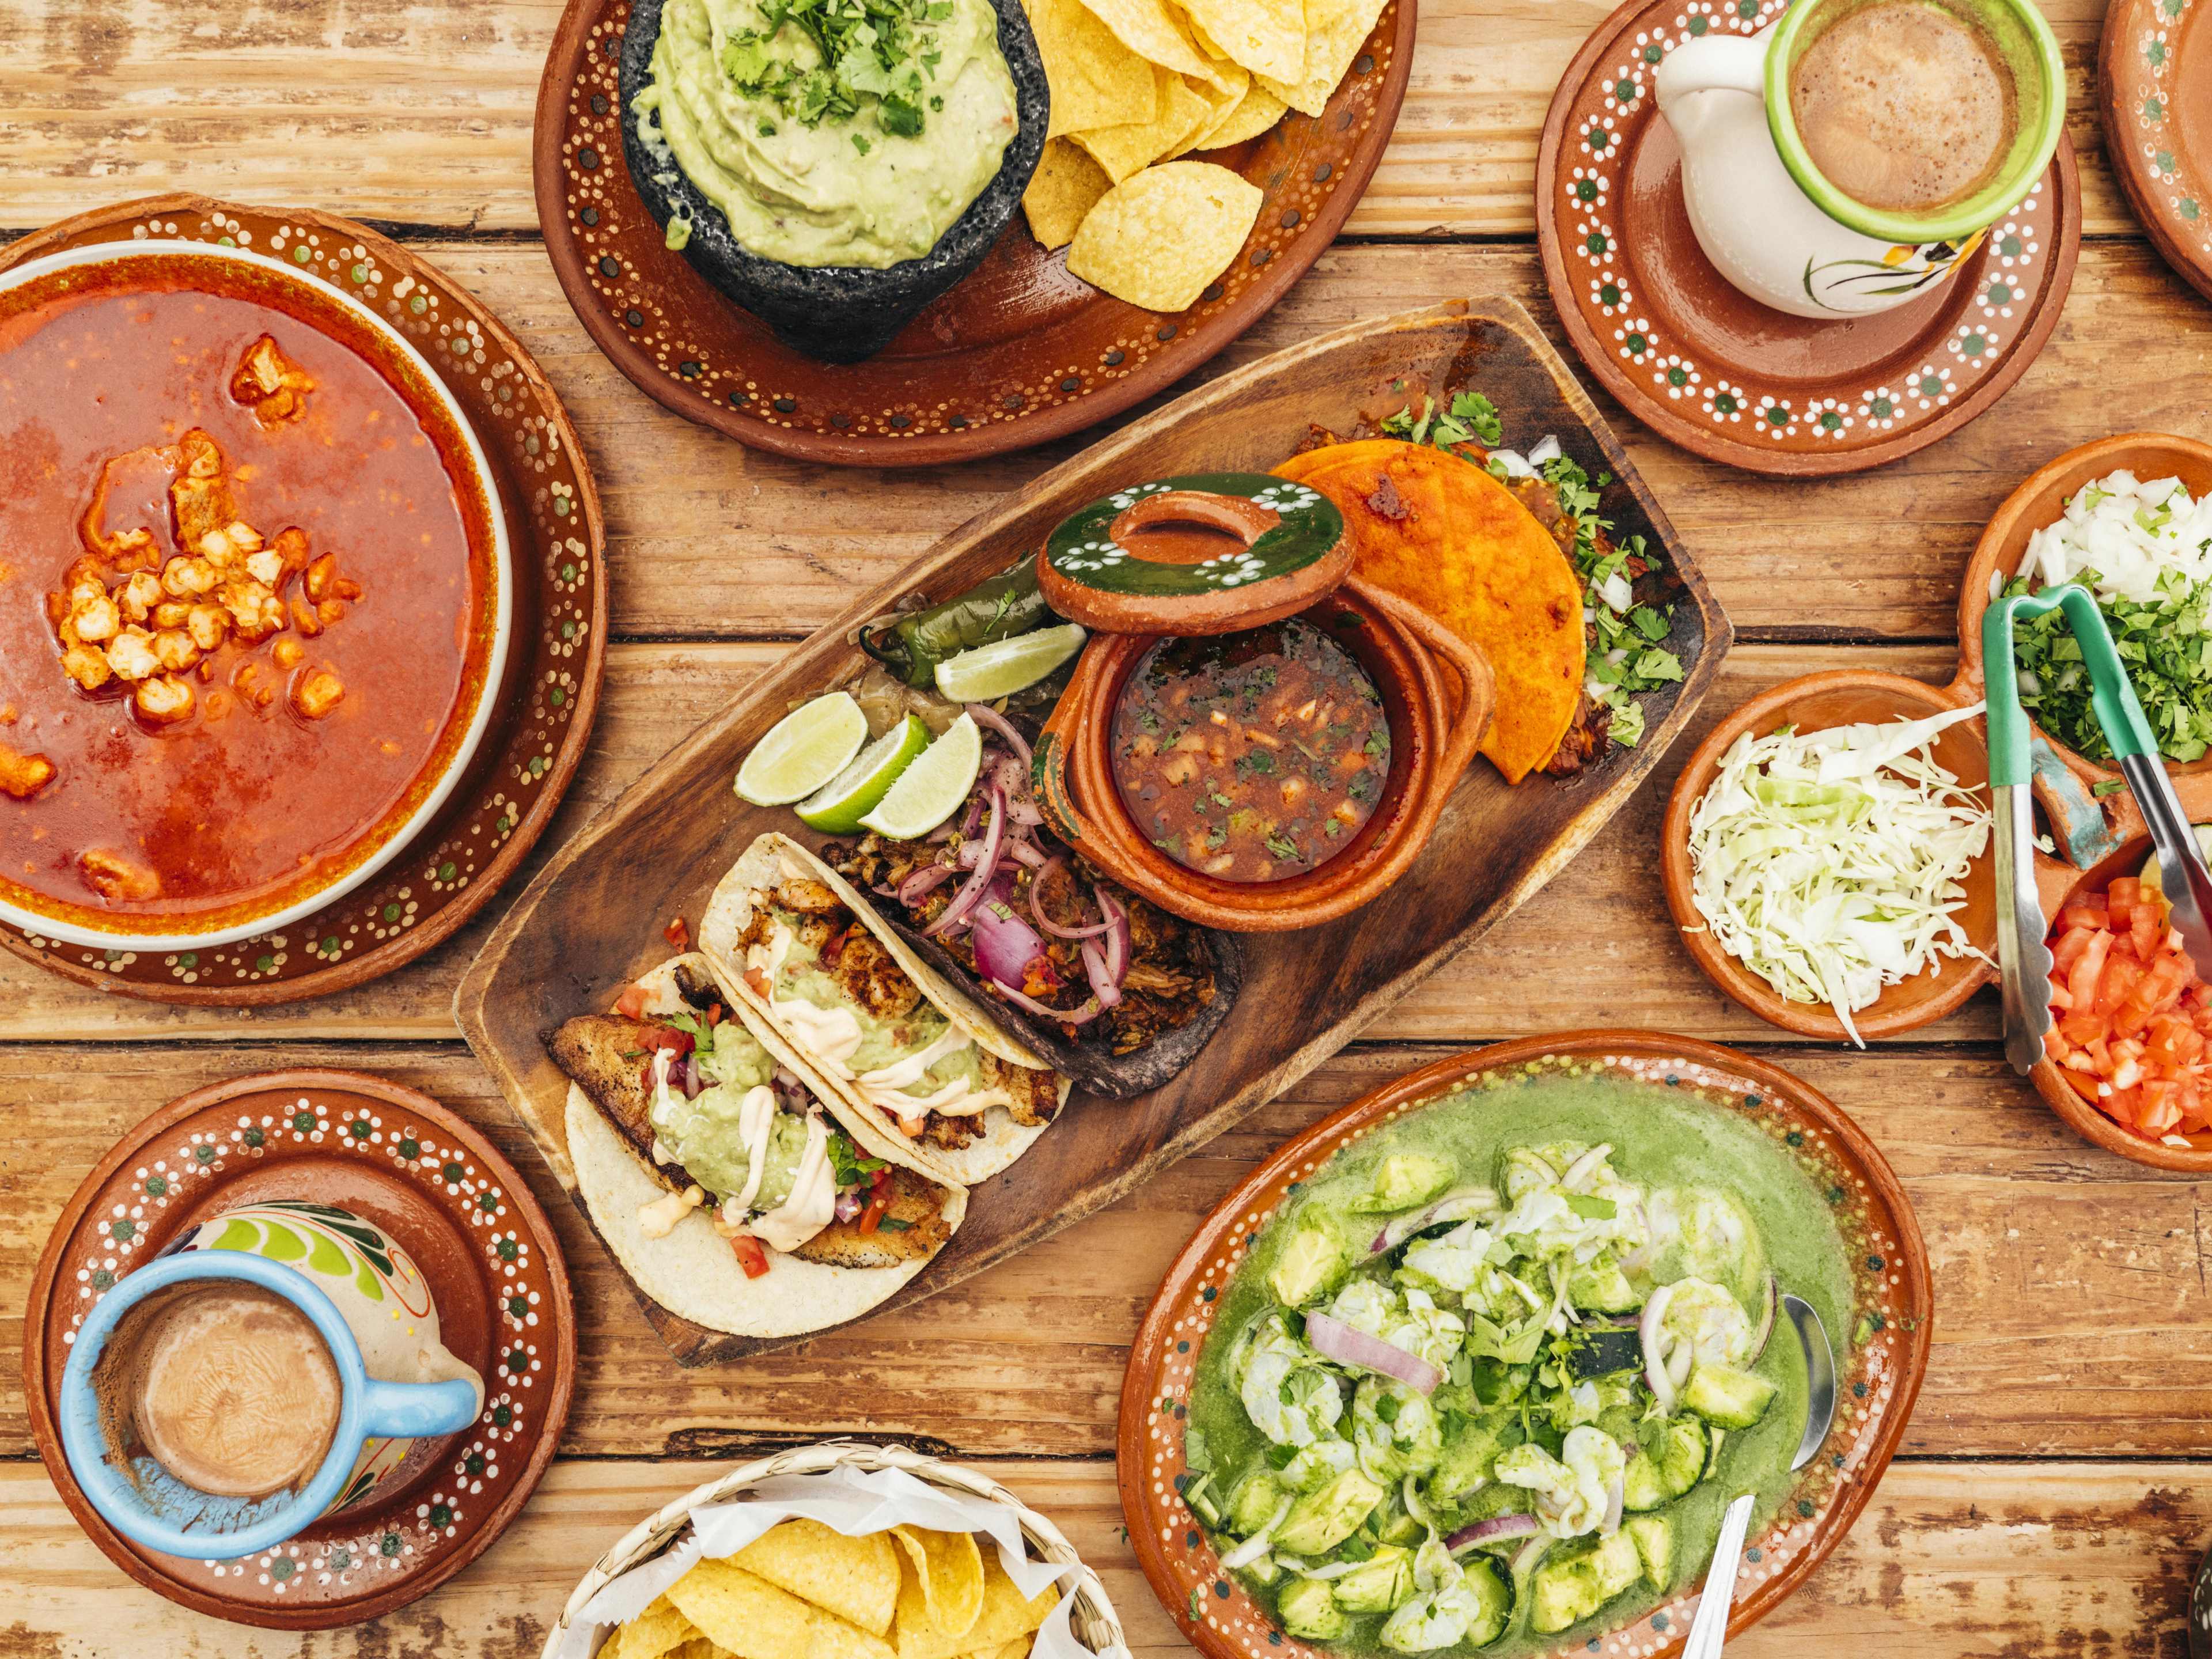 A spread of aguachile, tacos, and pozole at Chuy's Fiestas